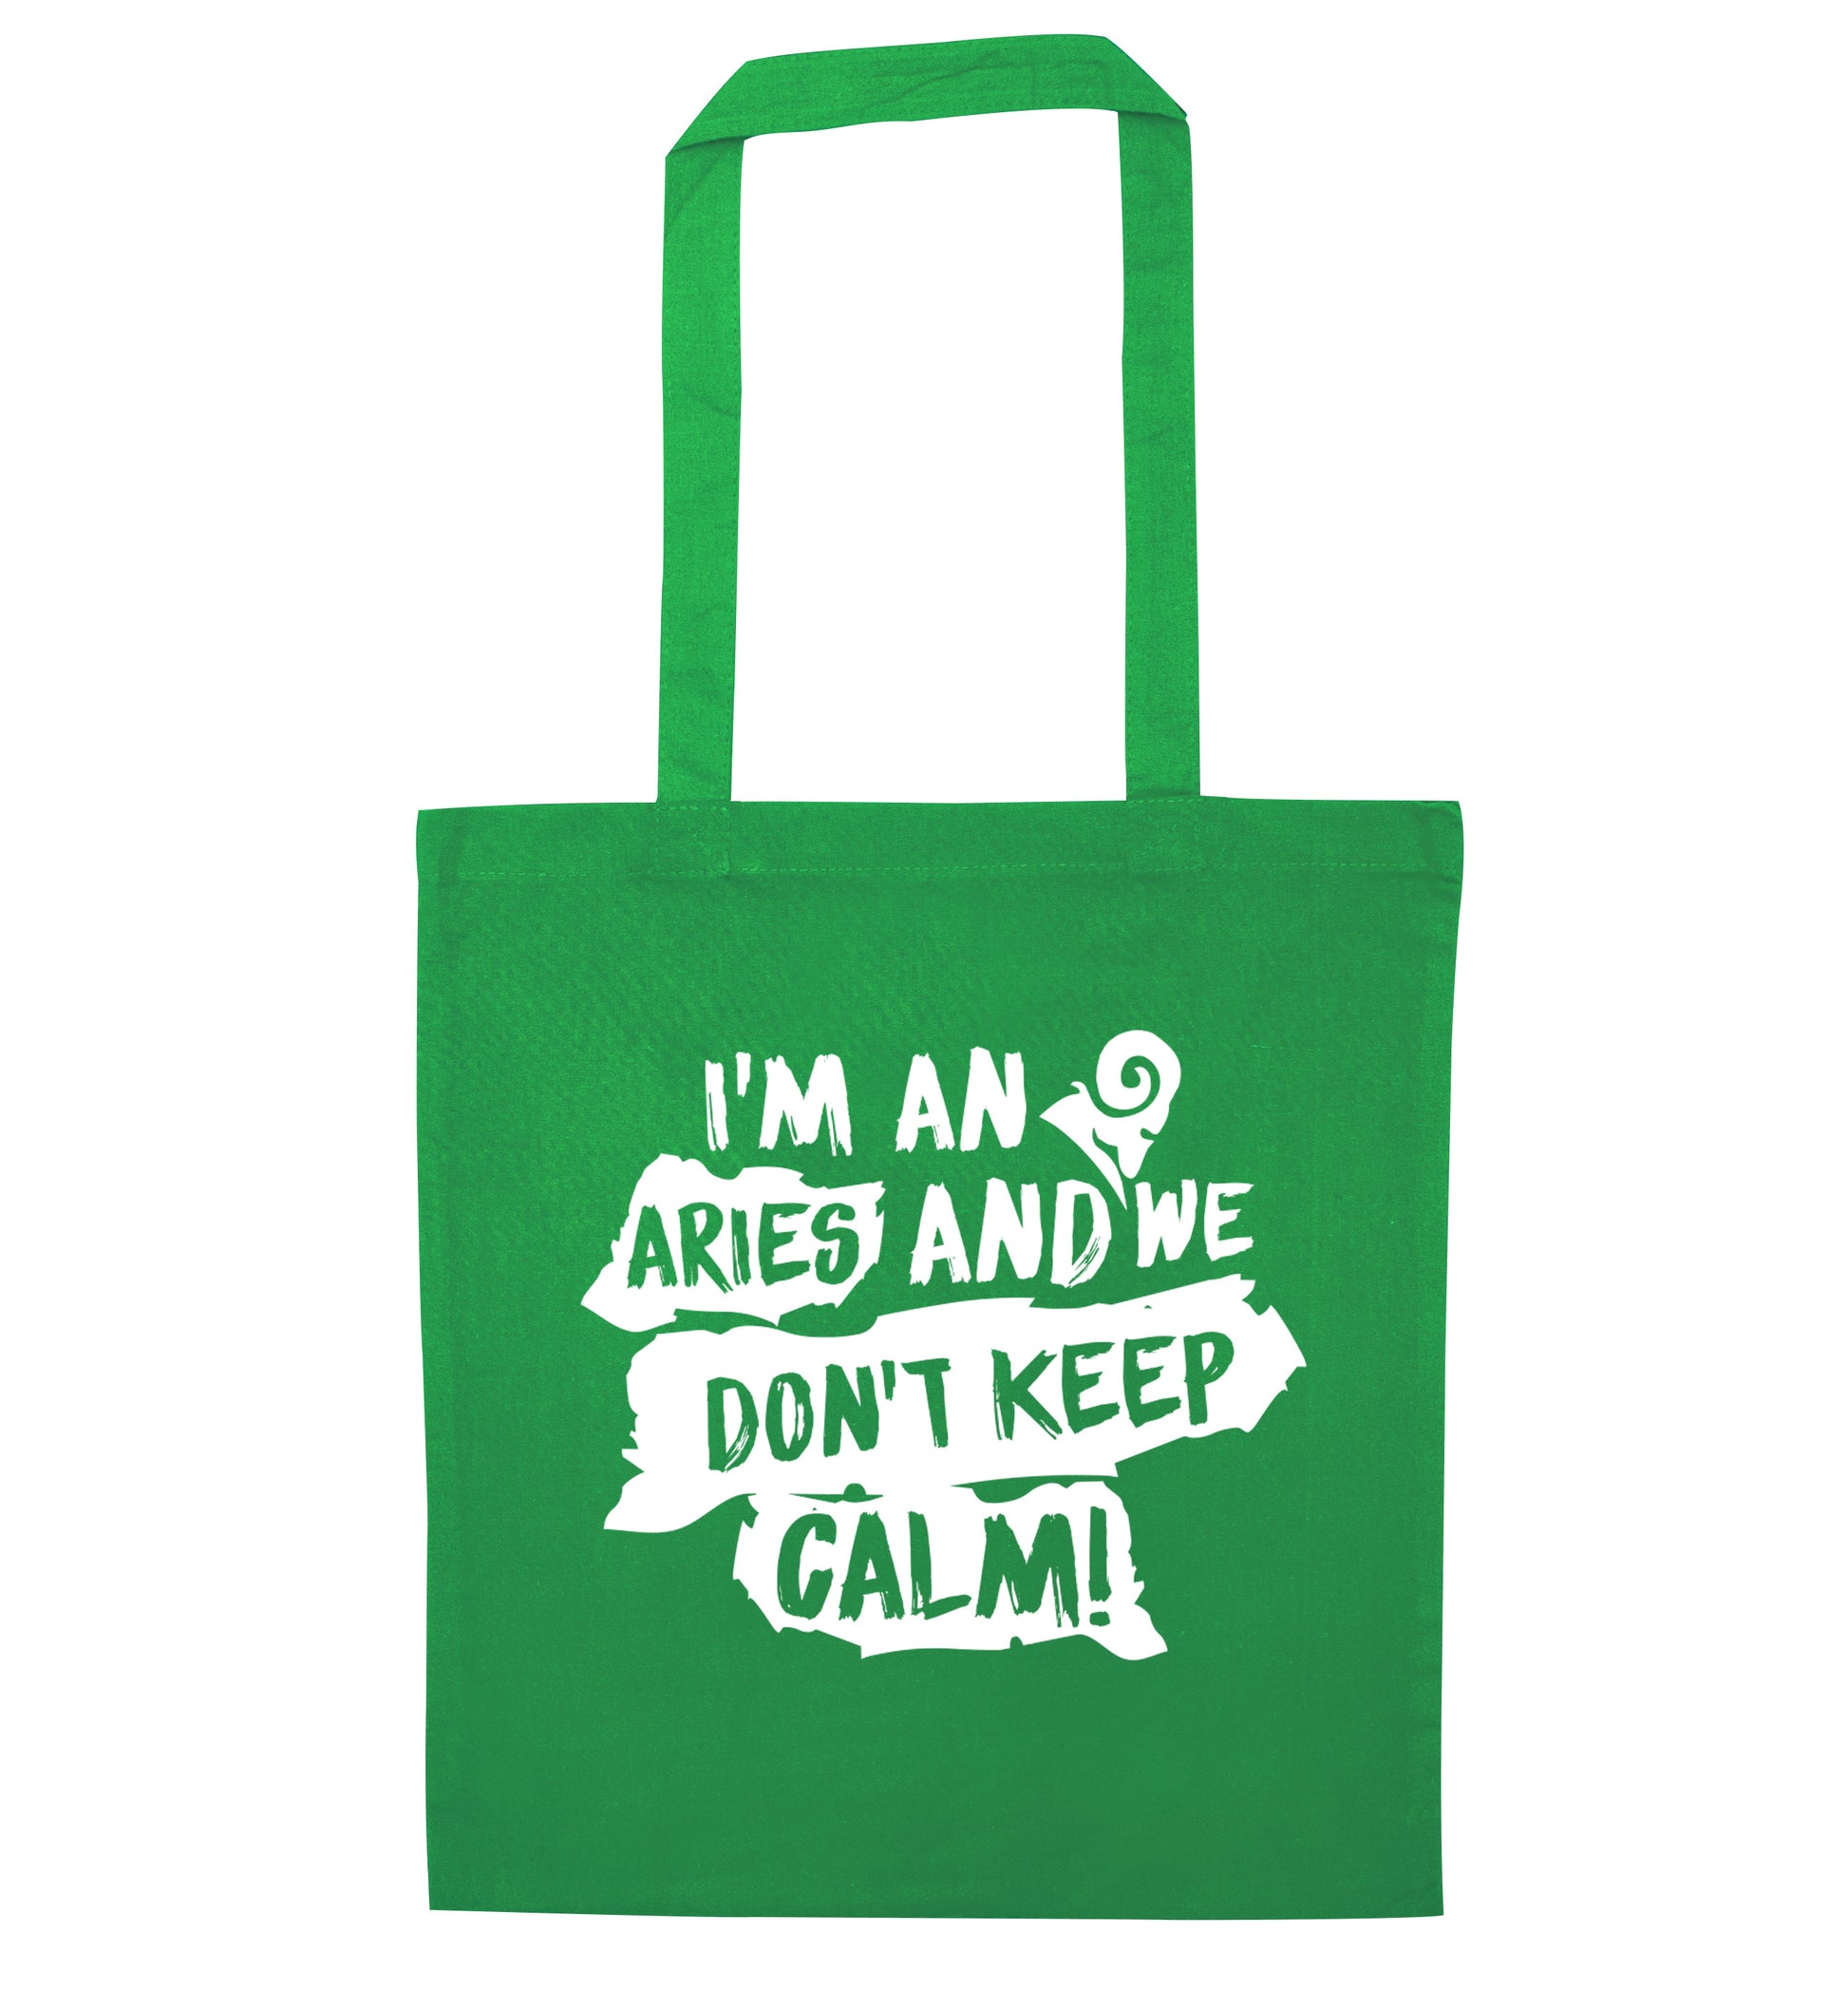 I'm an aries and we don't keep calm green tote bag